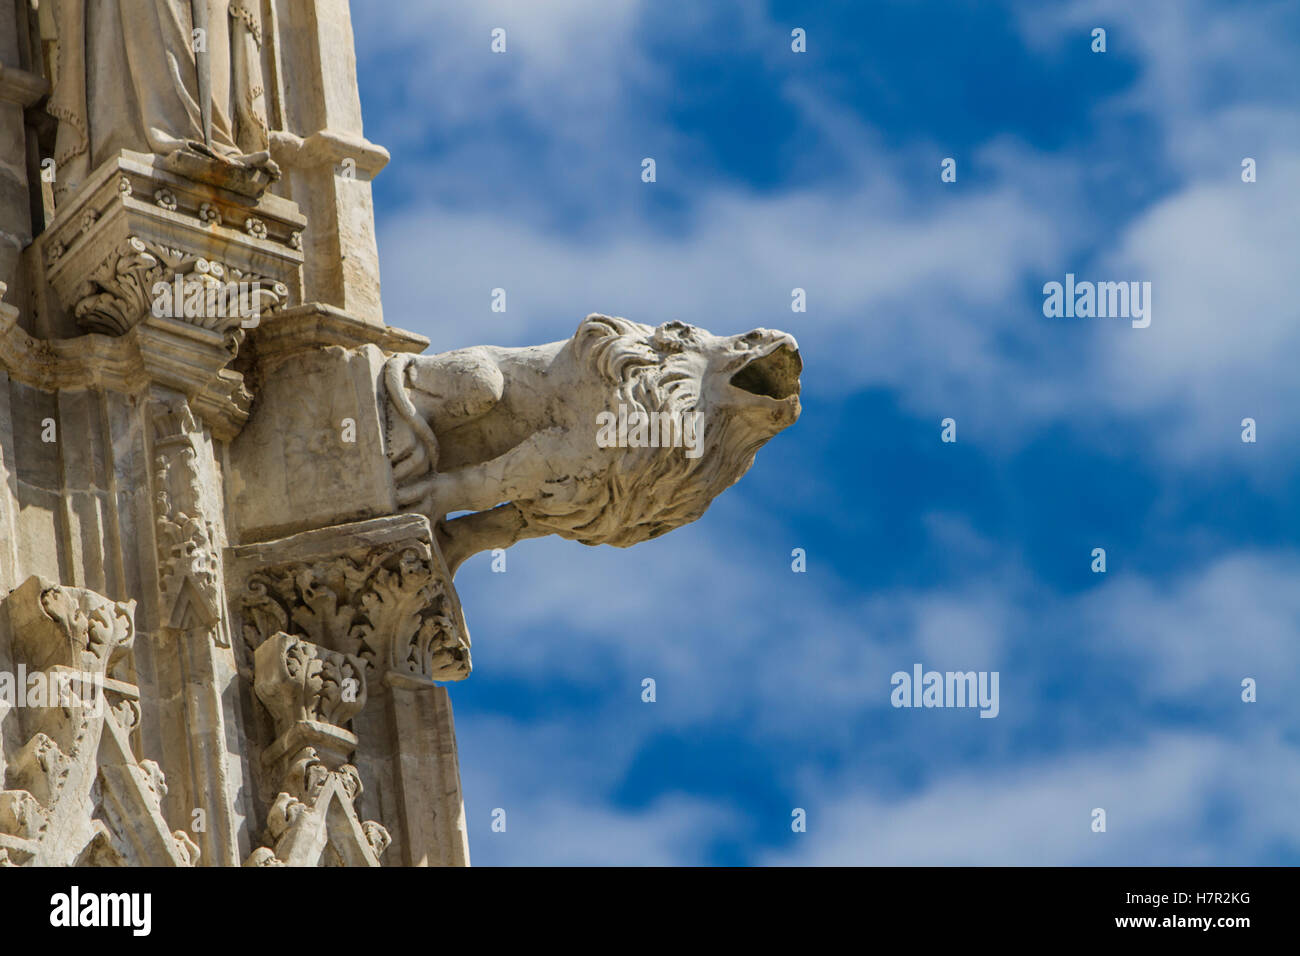 Exteriors and architectural details of the Duomo, Siena cathedral, Italy Stock Photo